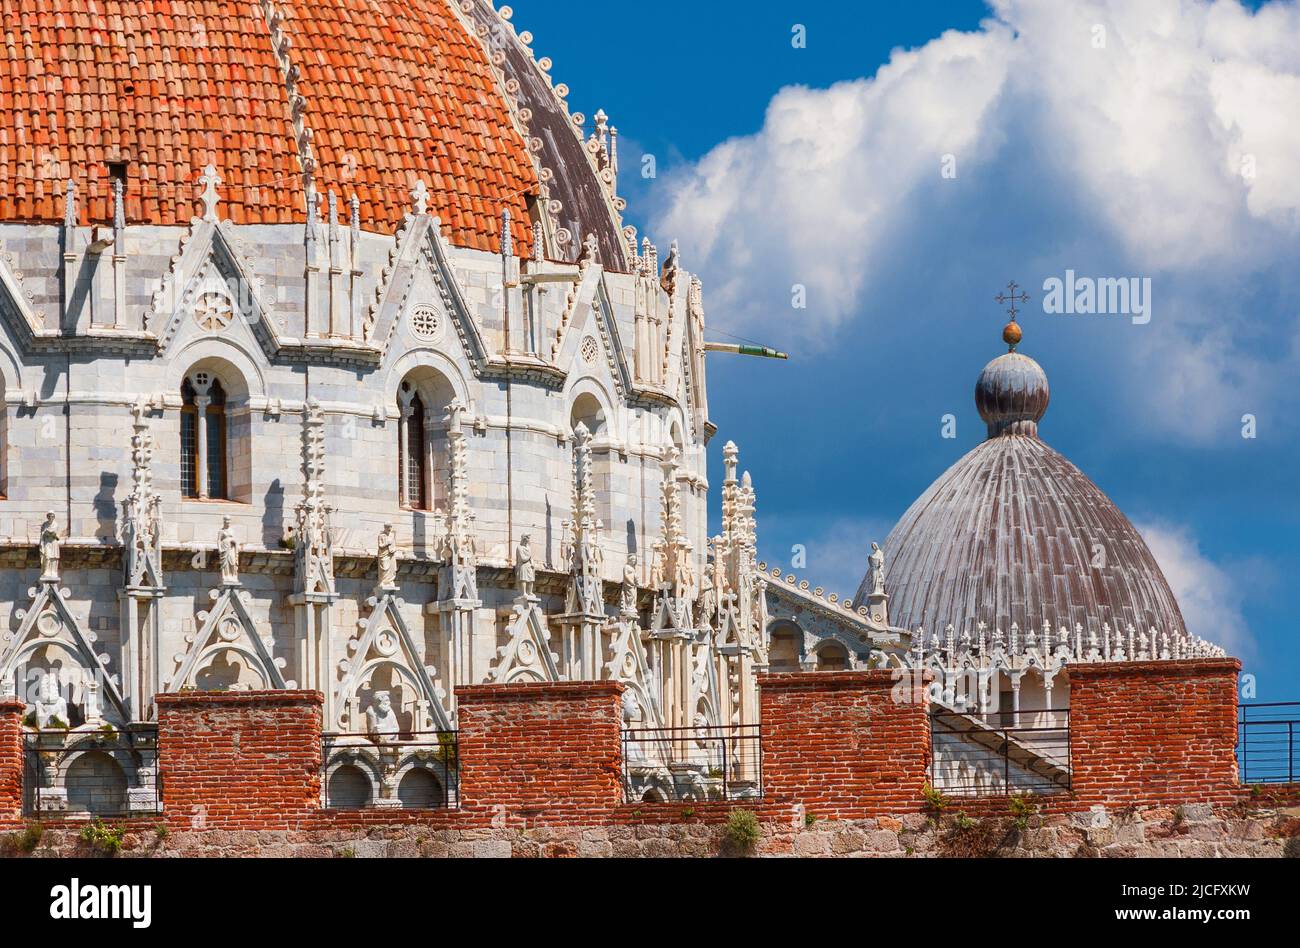 Pisa famous landmarks: Baptistry and Cathedral medieval domes, seen from outiside the city ancient walls, with blue sky and white clouds Stock Photo